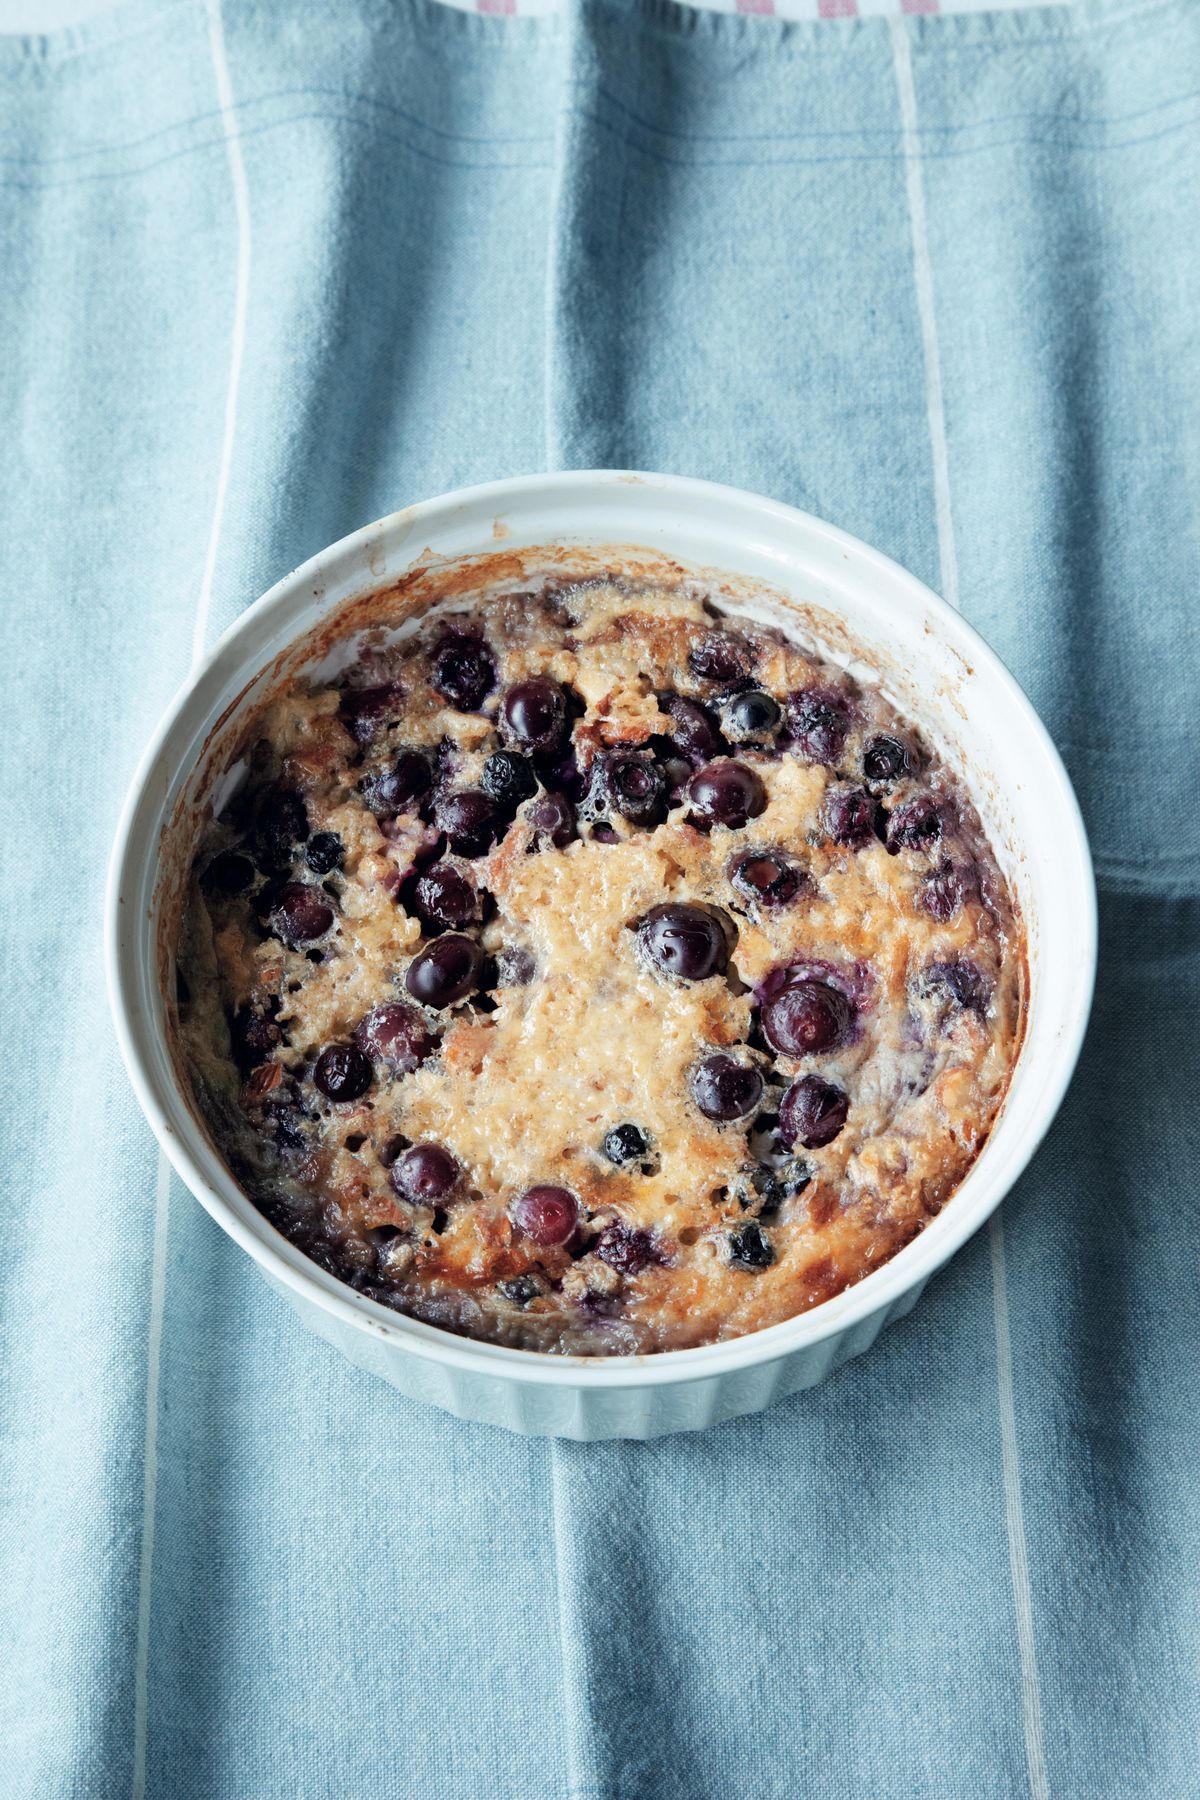 Baked fruit and nut oatmeal | Breakfast Recipes